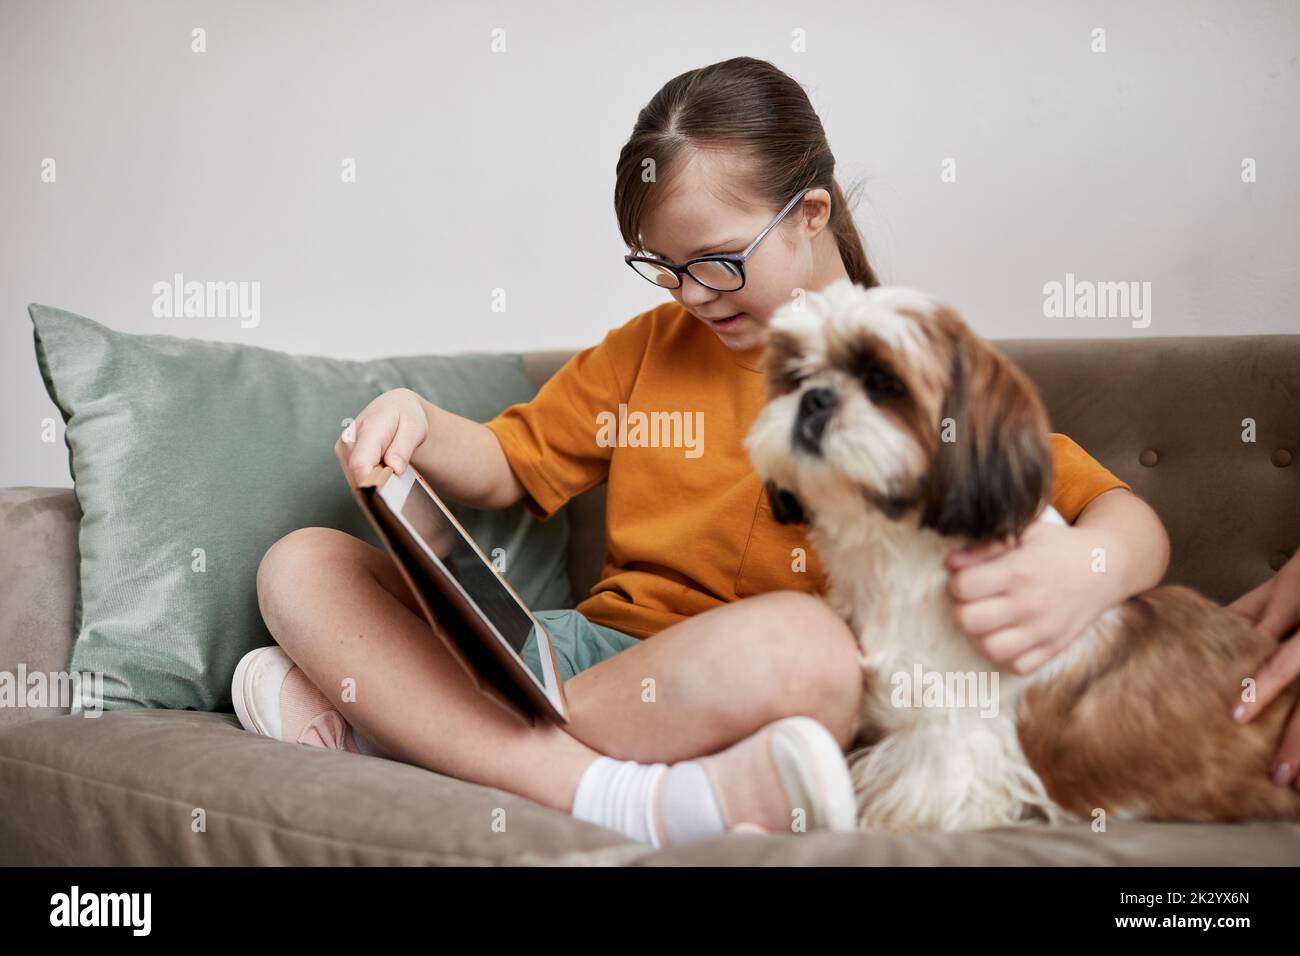 Full length portrait of cute girl with Down syndrome using tablet while sitting on couch with dog companion Stock Photo